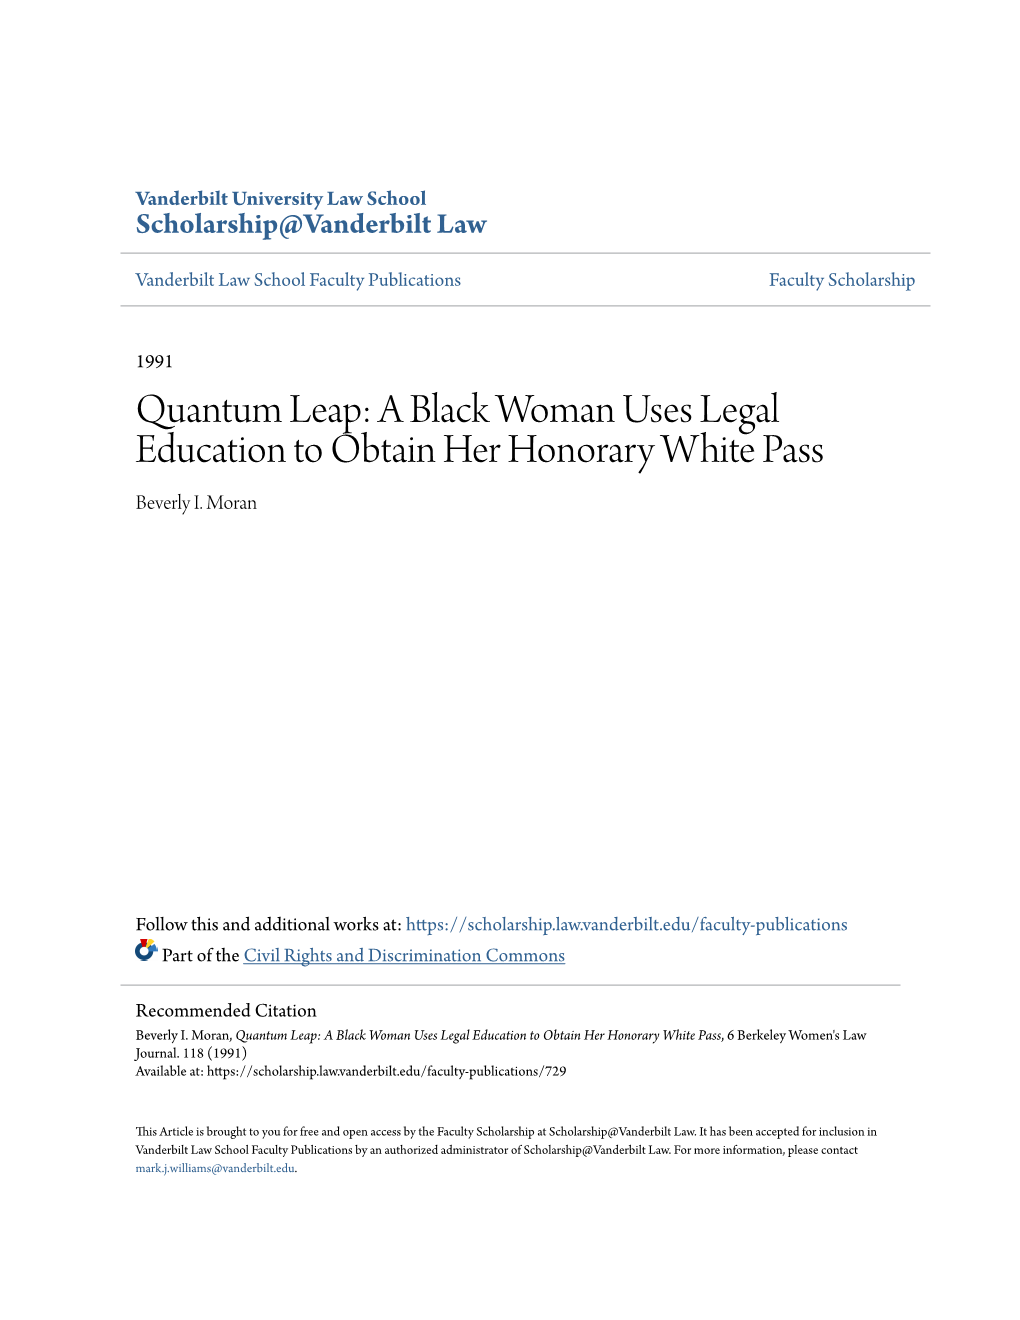 Quantum Leap: a Black Woman Uses Legal Education to Obtain Her Honorary White Pass Beverly I